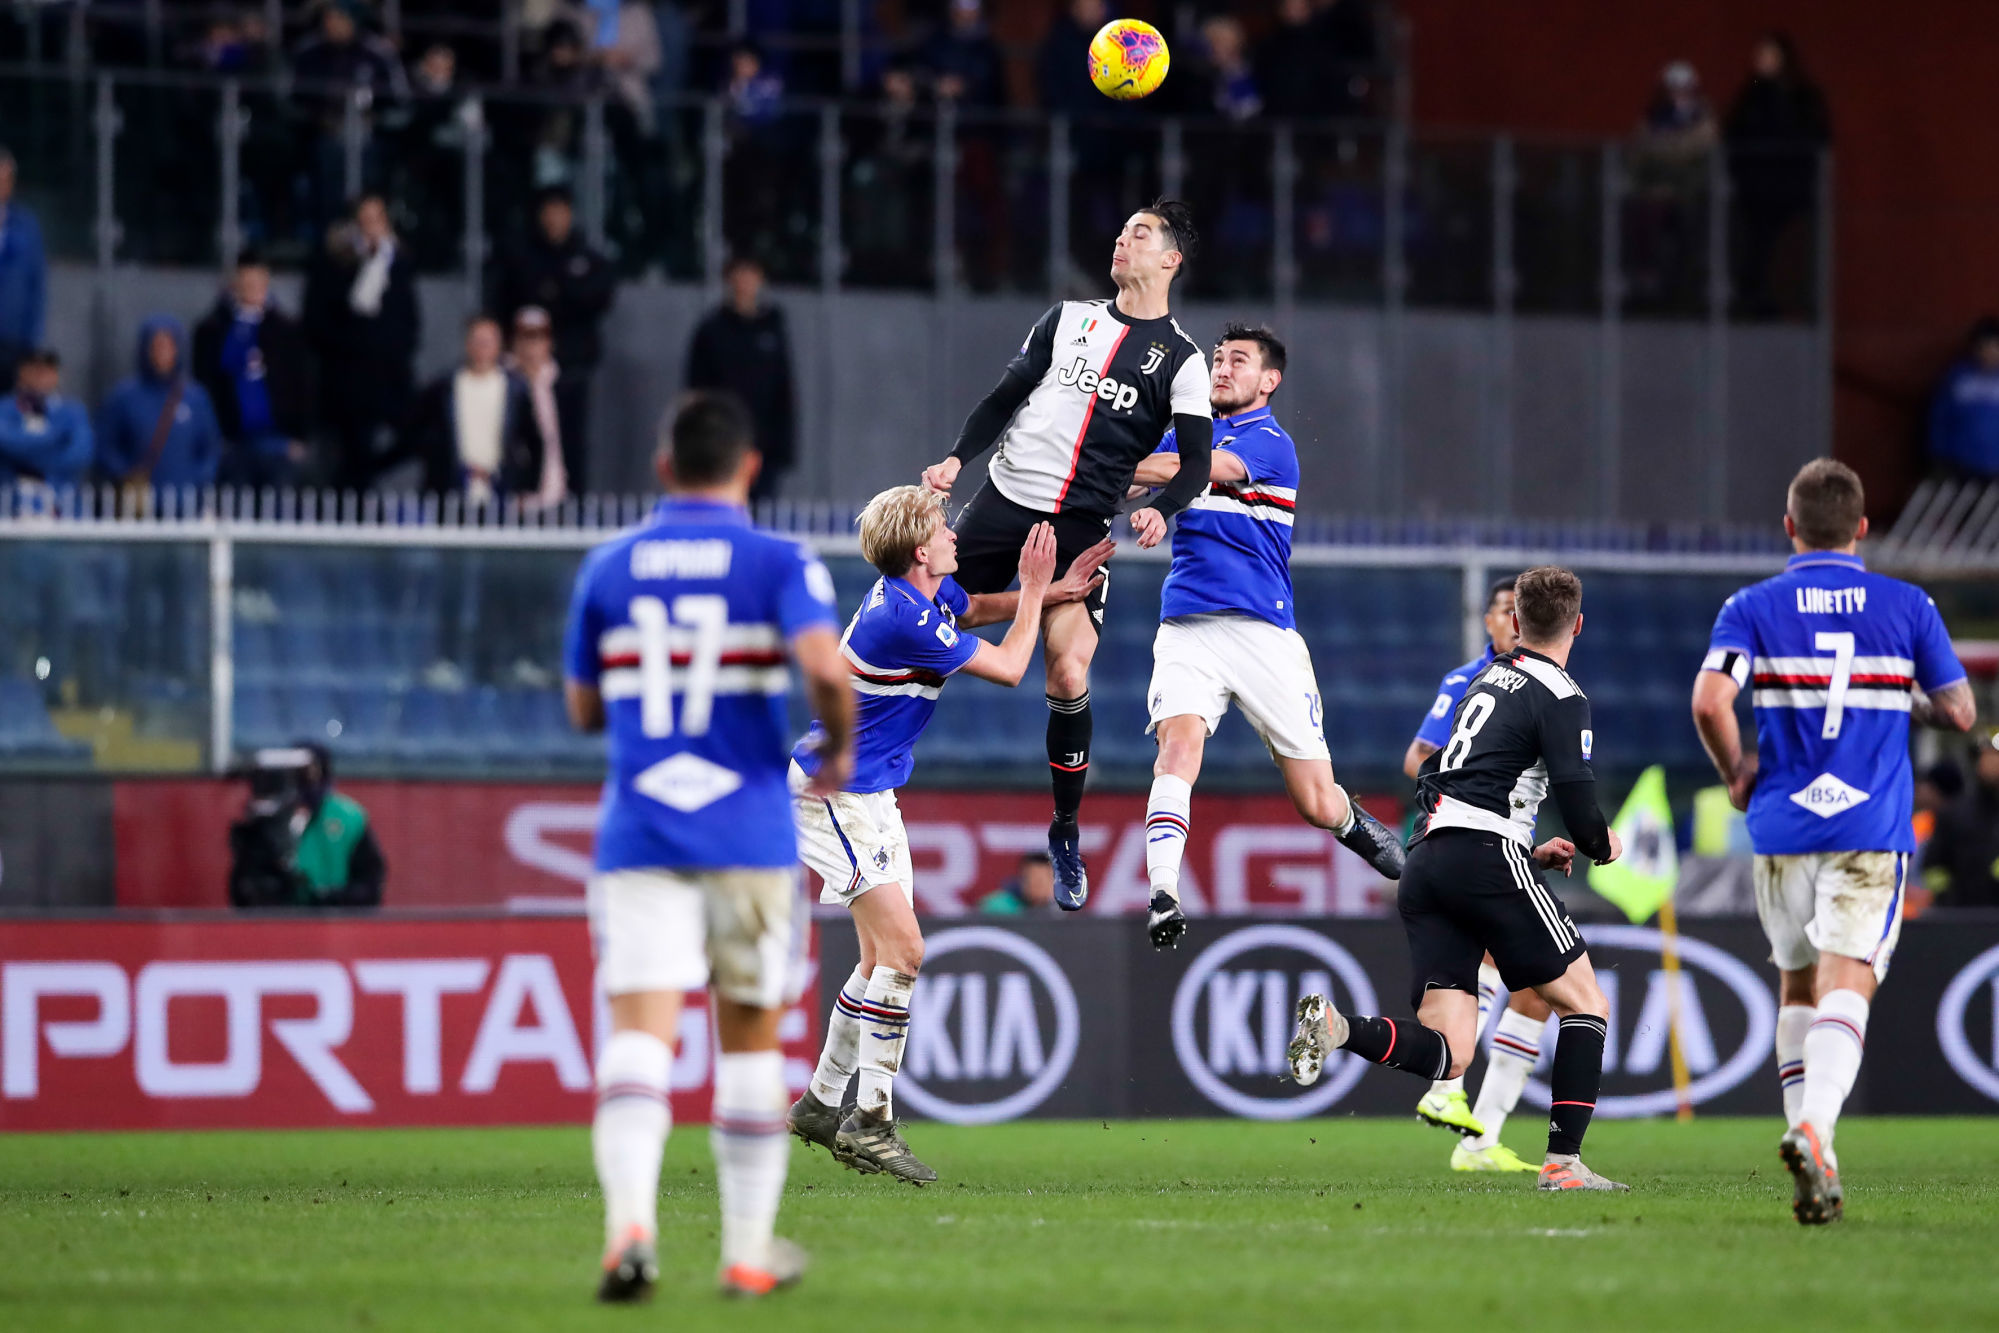 Cristiano Ronaldo of Juventus leaps above Morten Thorsby and Nicola Murru of Sampdoria to win this header during the Serie A match at Luigi Ferraris, Genoa. Picture date: 18th December 2019. Picture credit should read: Jonathan Moscrop/Sportimage 

Photo by Icon Sport - Cristiano RONALDO - Nicola MURRU - Morten THORSBY - Stadio Comunale Luigi Ferraris - Genes (Italie)